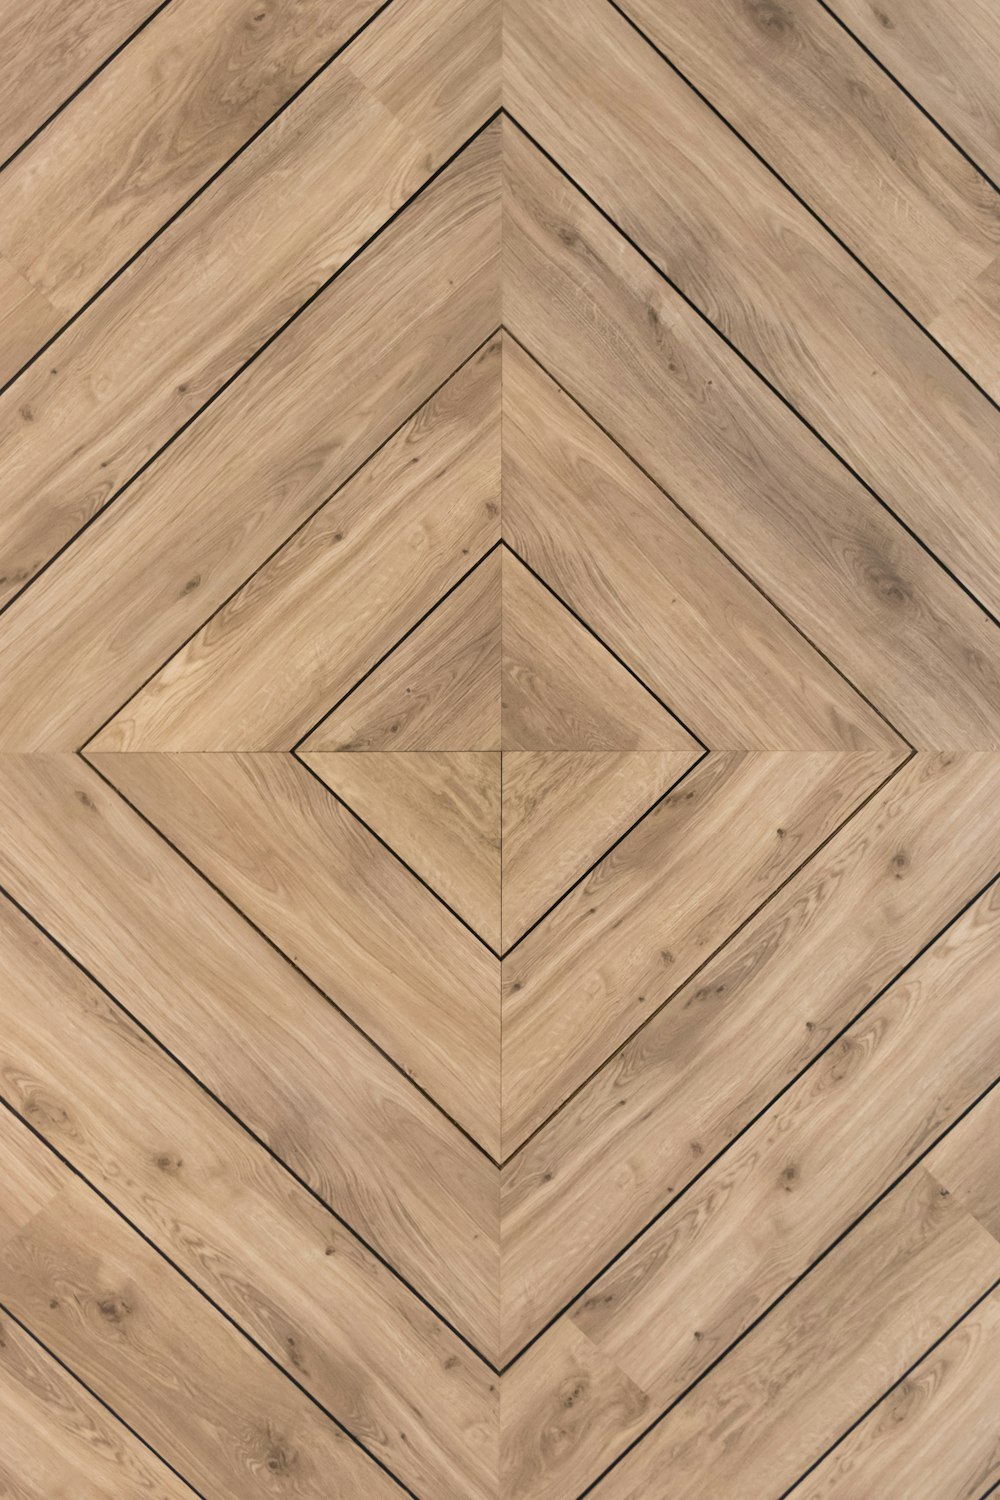 500 Floor Pictures Free, Is Parquet Flooring Still Available